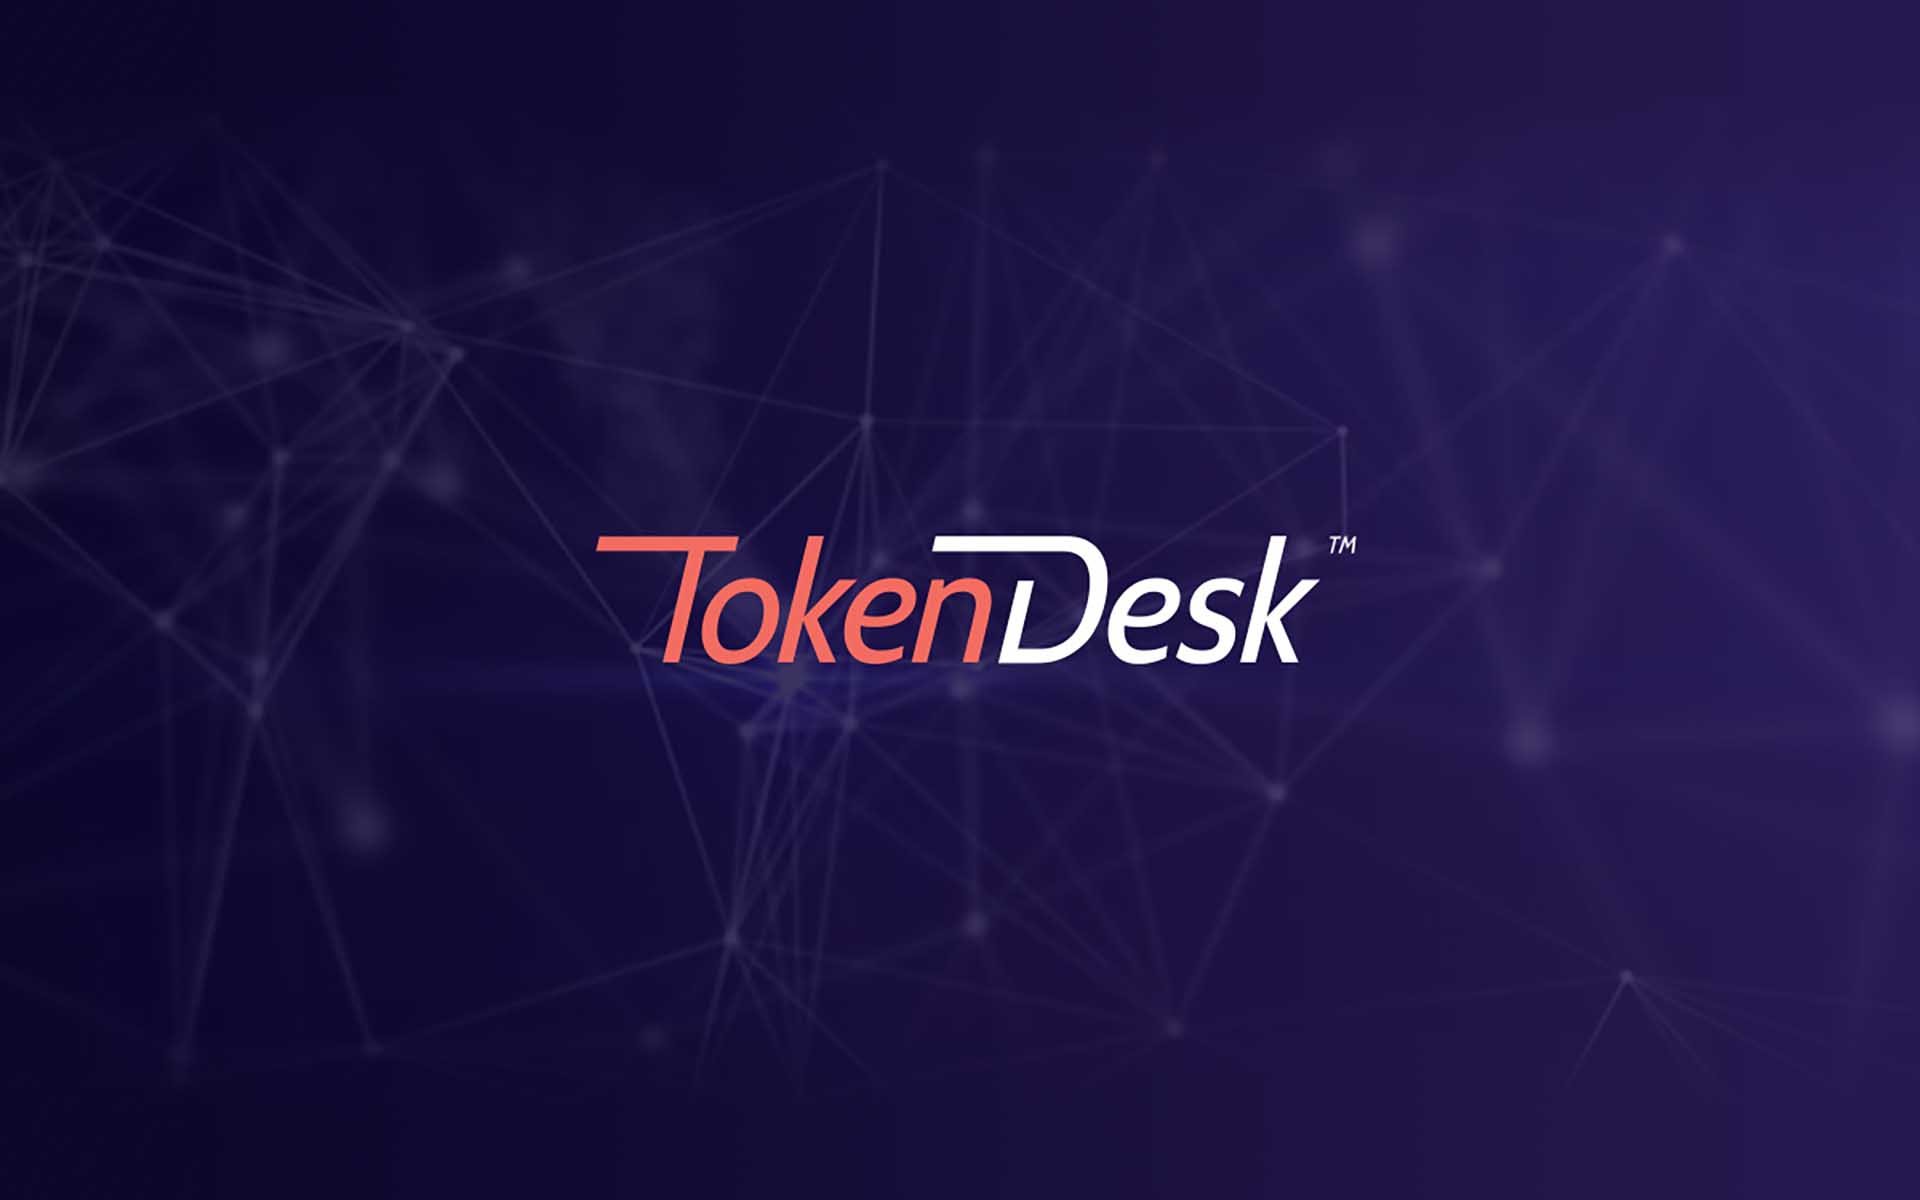 TokenDesk ICO Marketplace Offers Tokens for Fiat